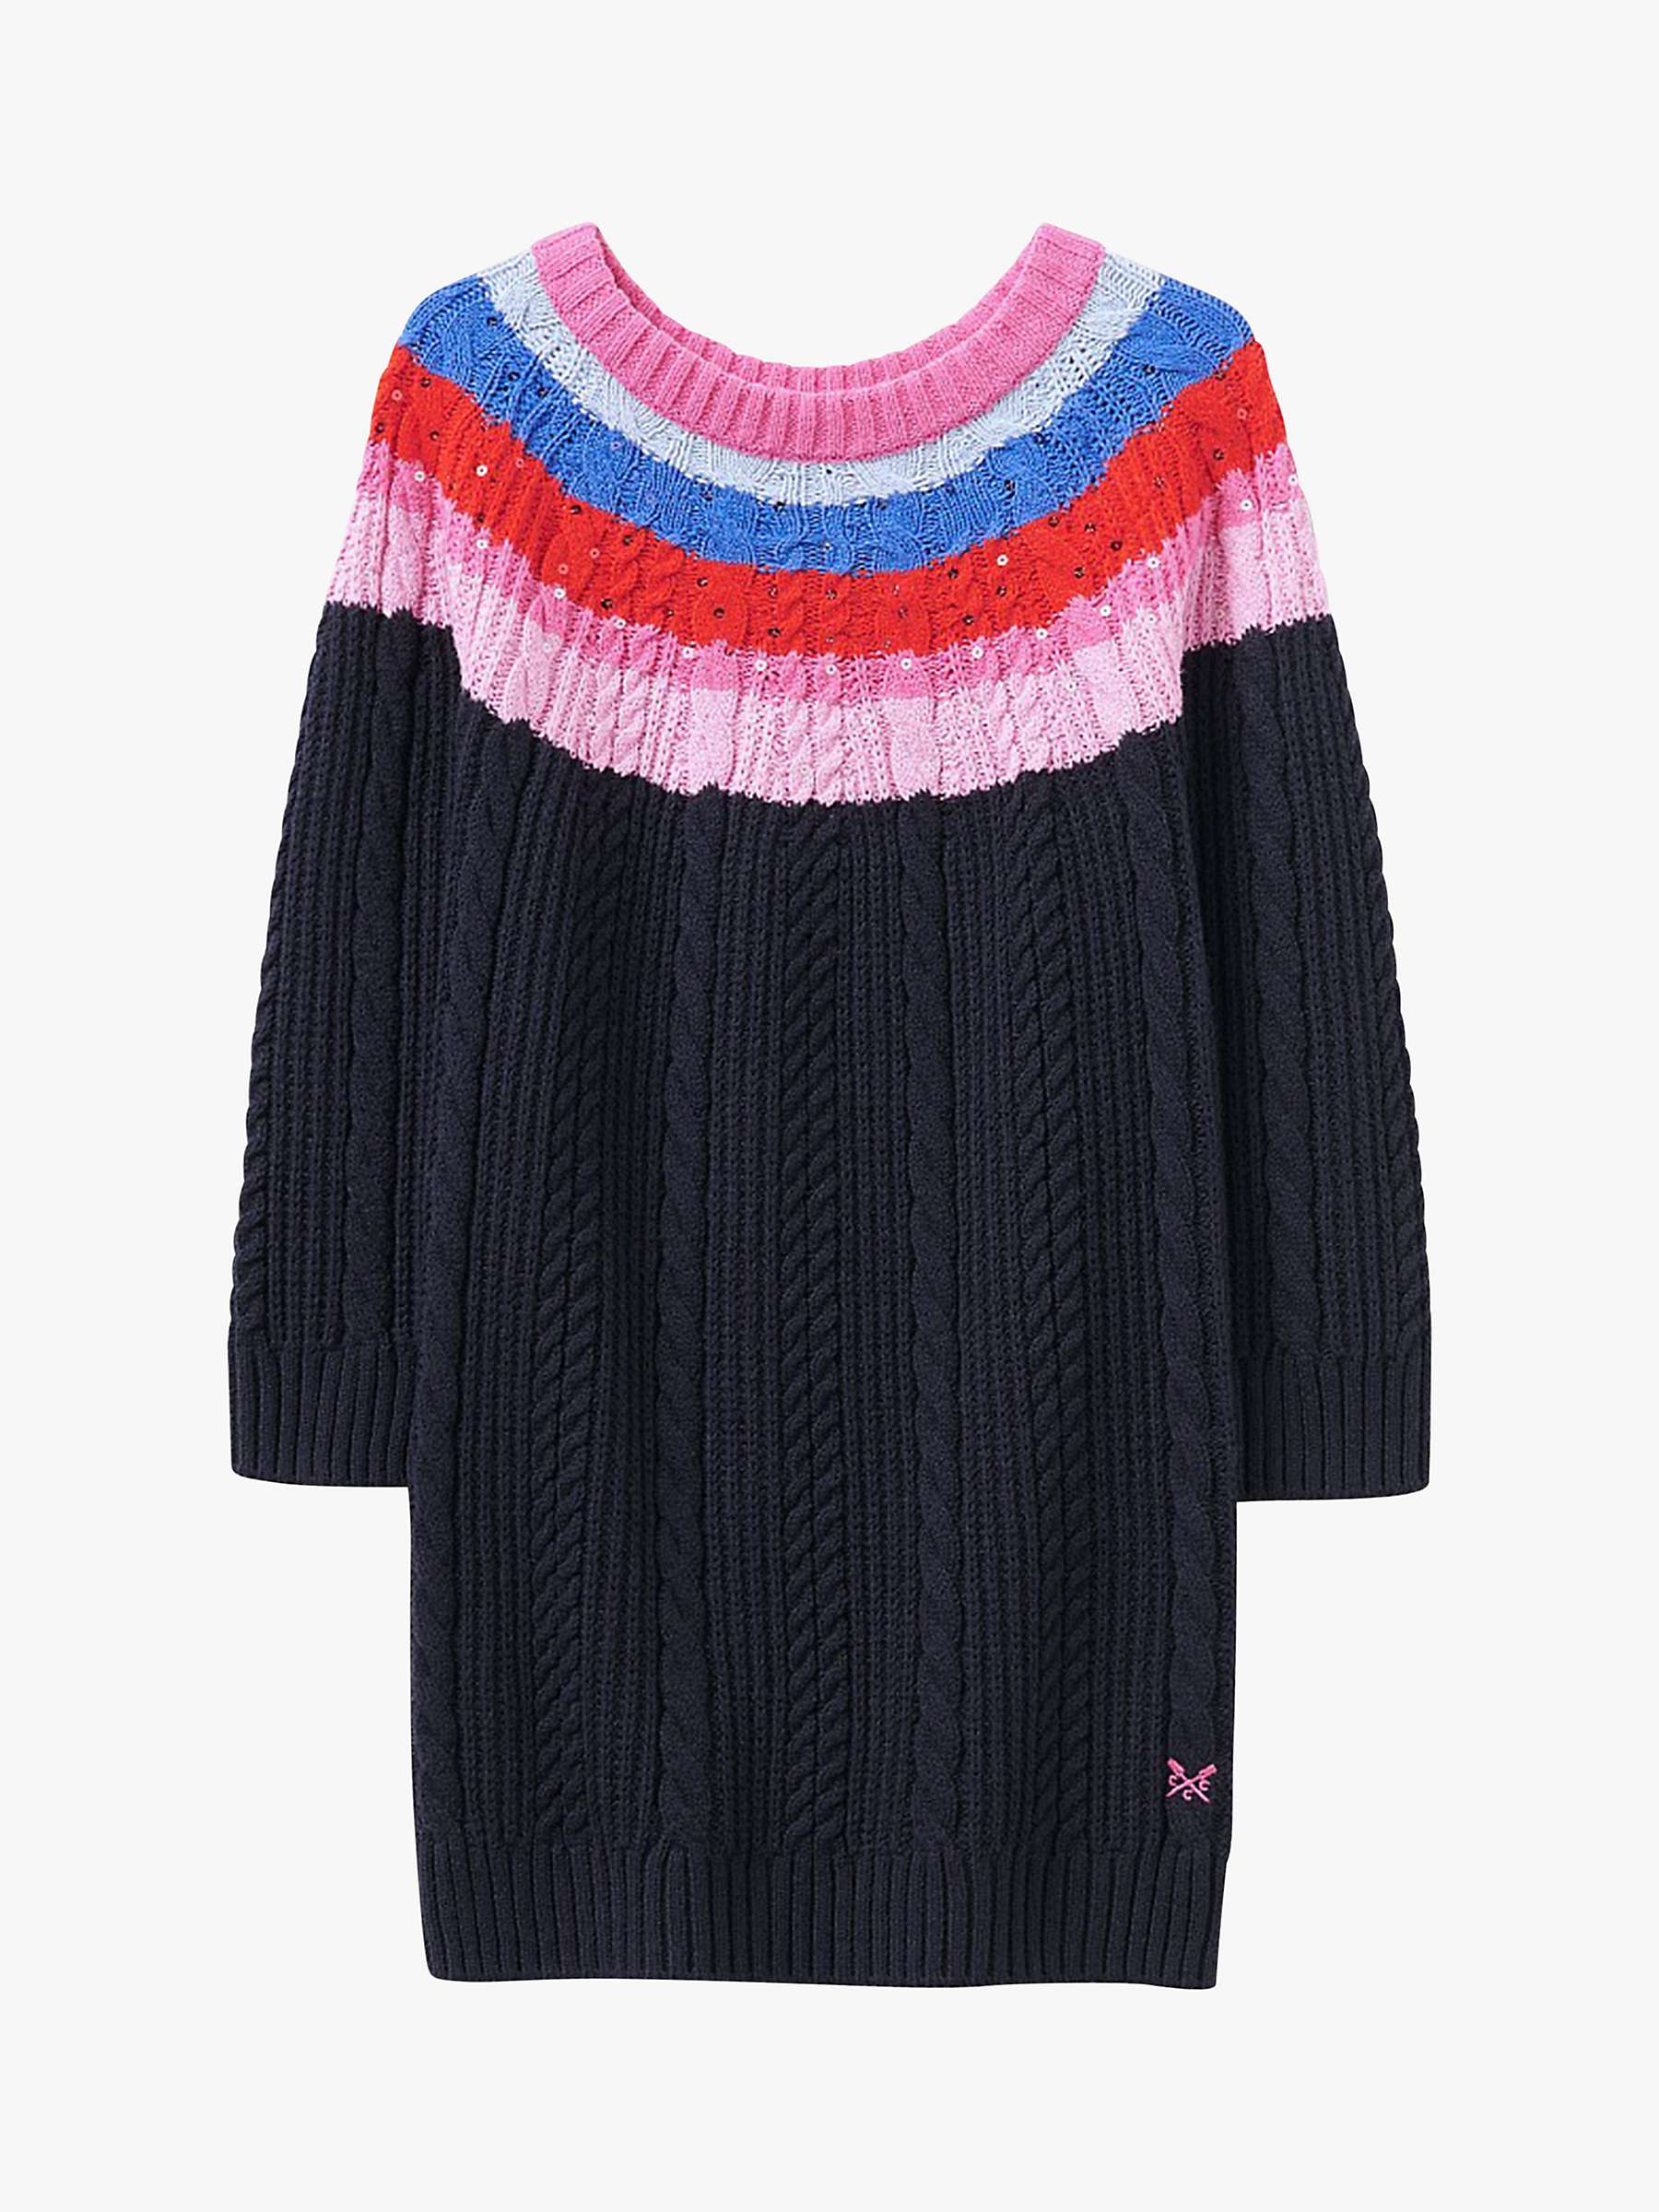 Buy Crew Clothing Kids' Rainbow Cable Knit Long Sleeve Dress, Navy Blue/Multi Online at johnlewis.com